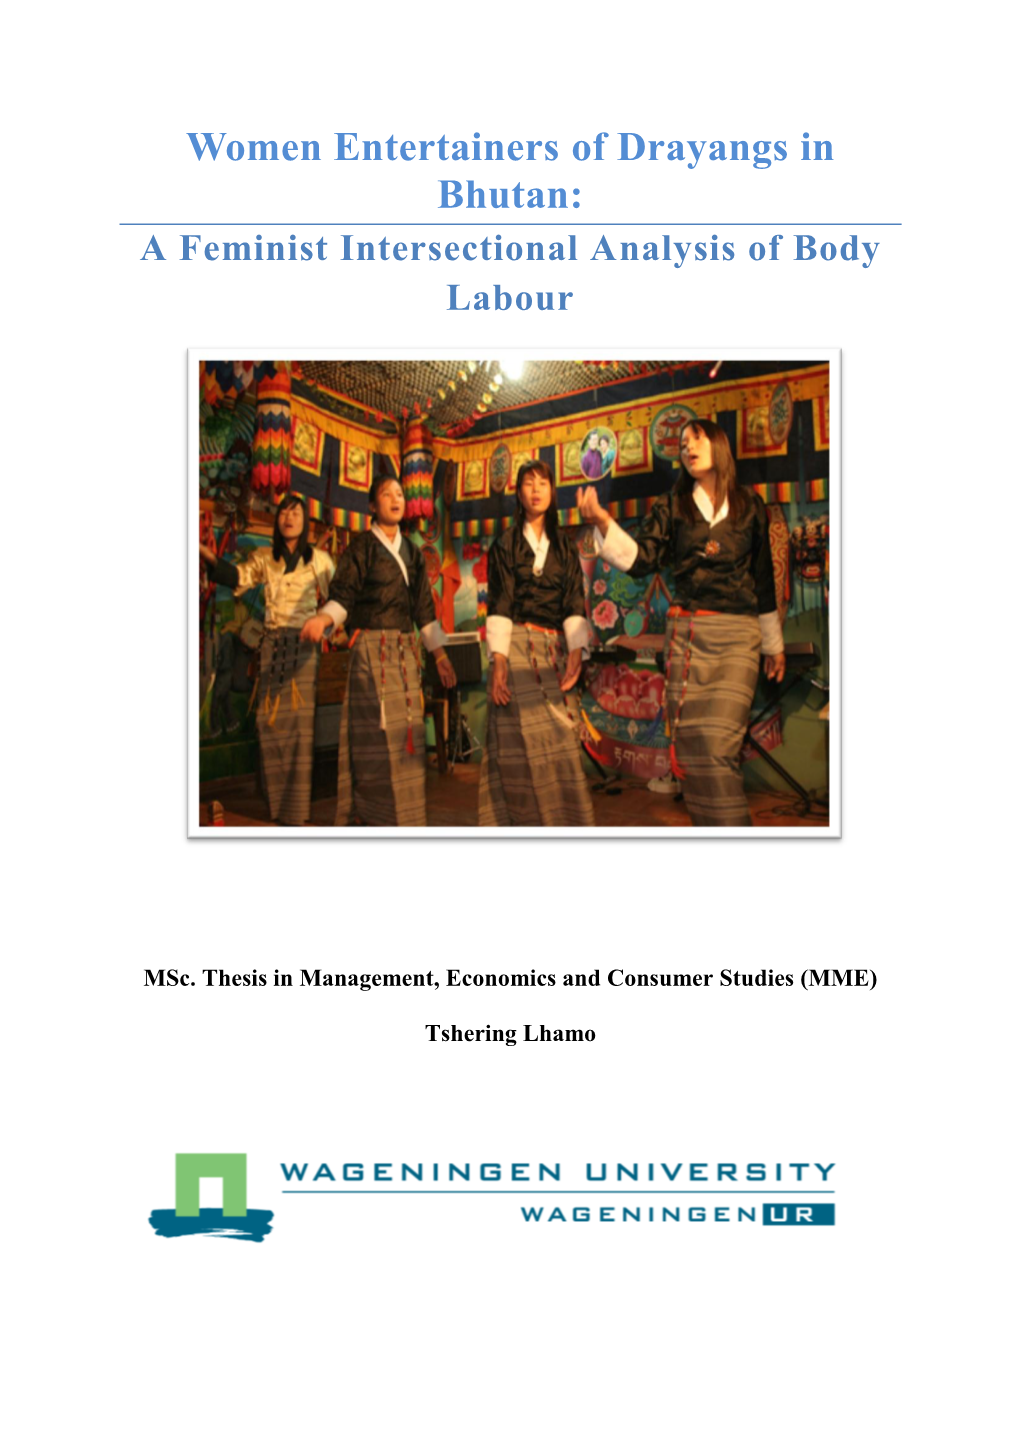 Women Entertainers of Drayangs in Bhutan: a Feminist Intersectional Analysis of Body Labour